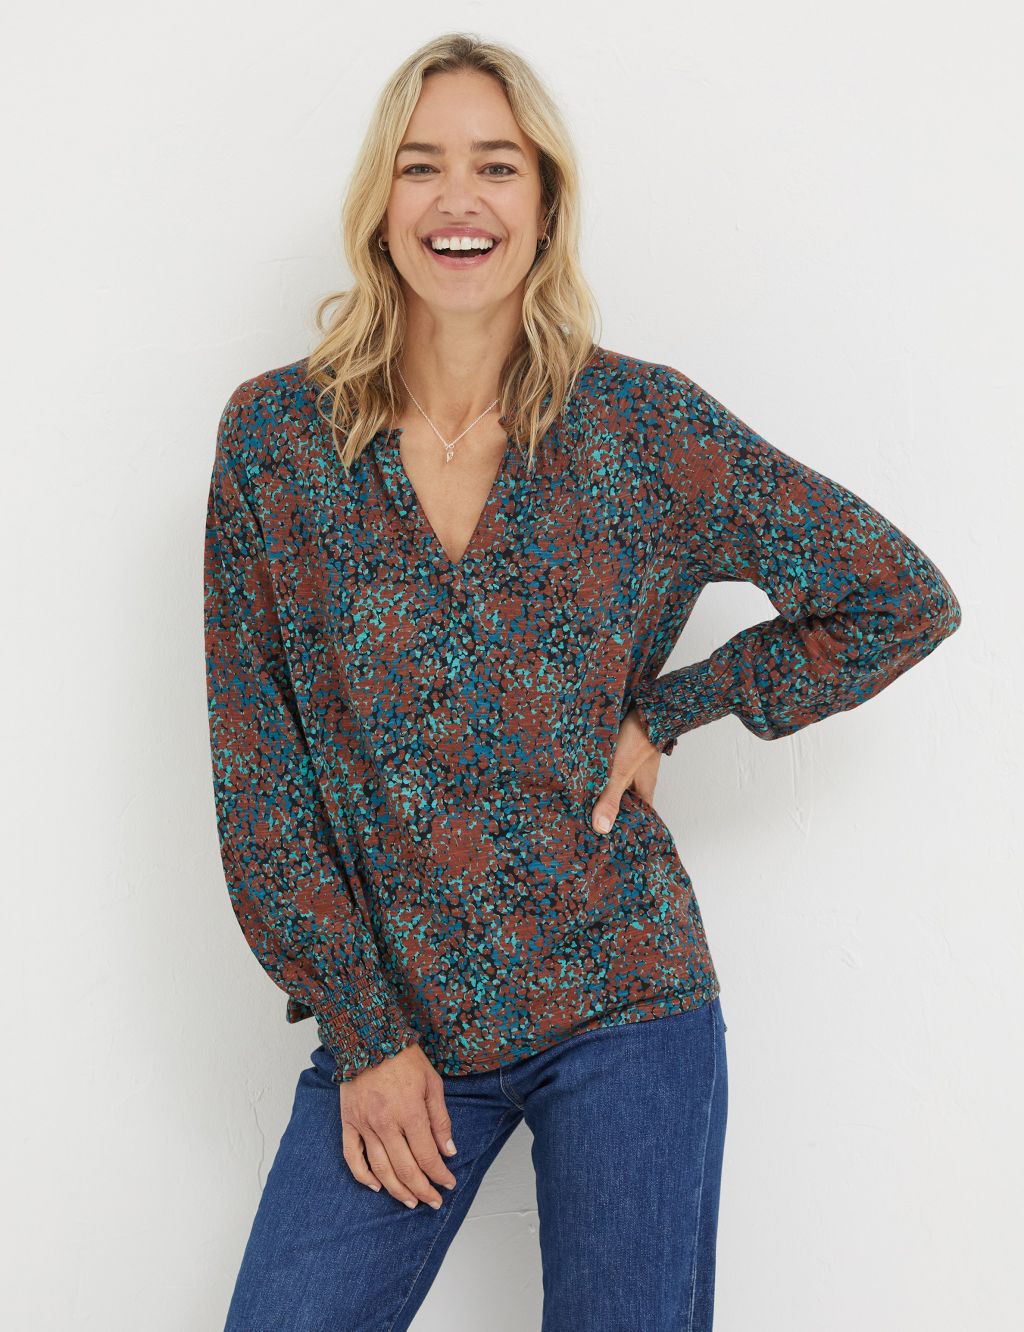 Cotton Modal Blend Printed Textured Top image 1